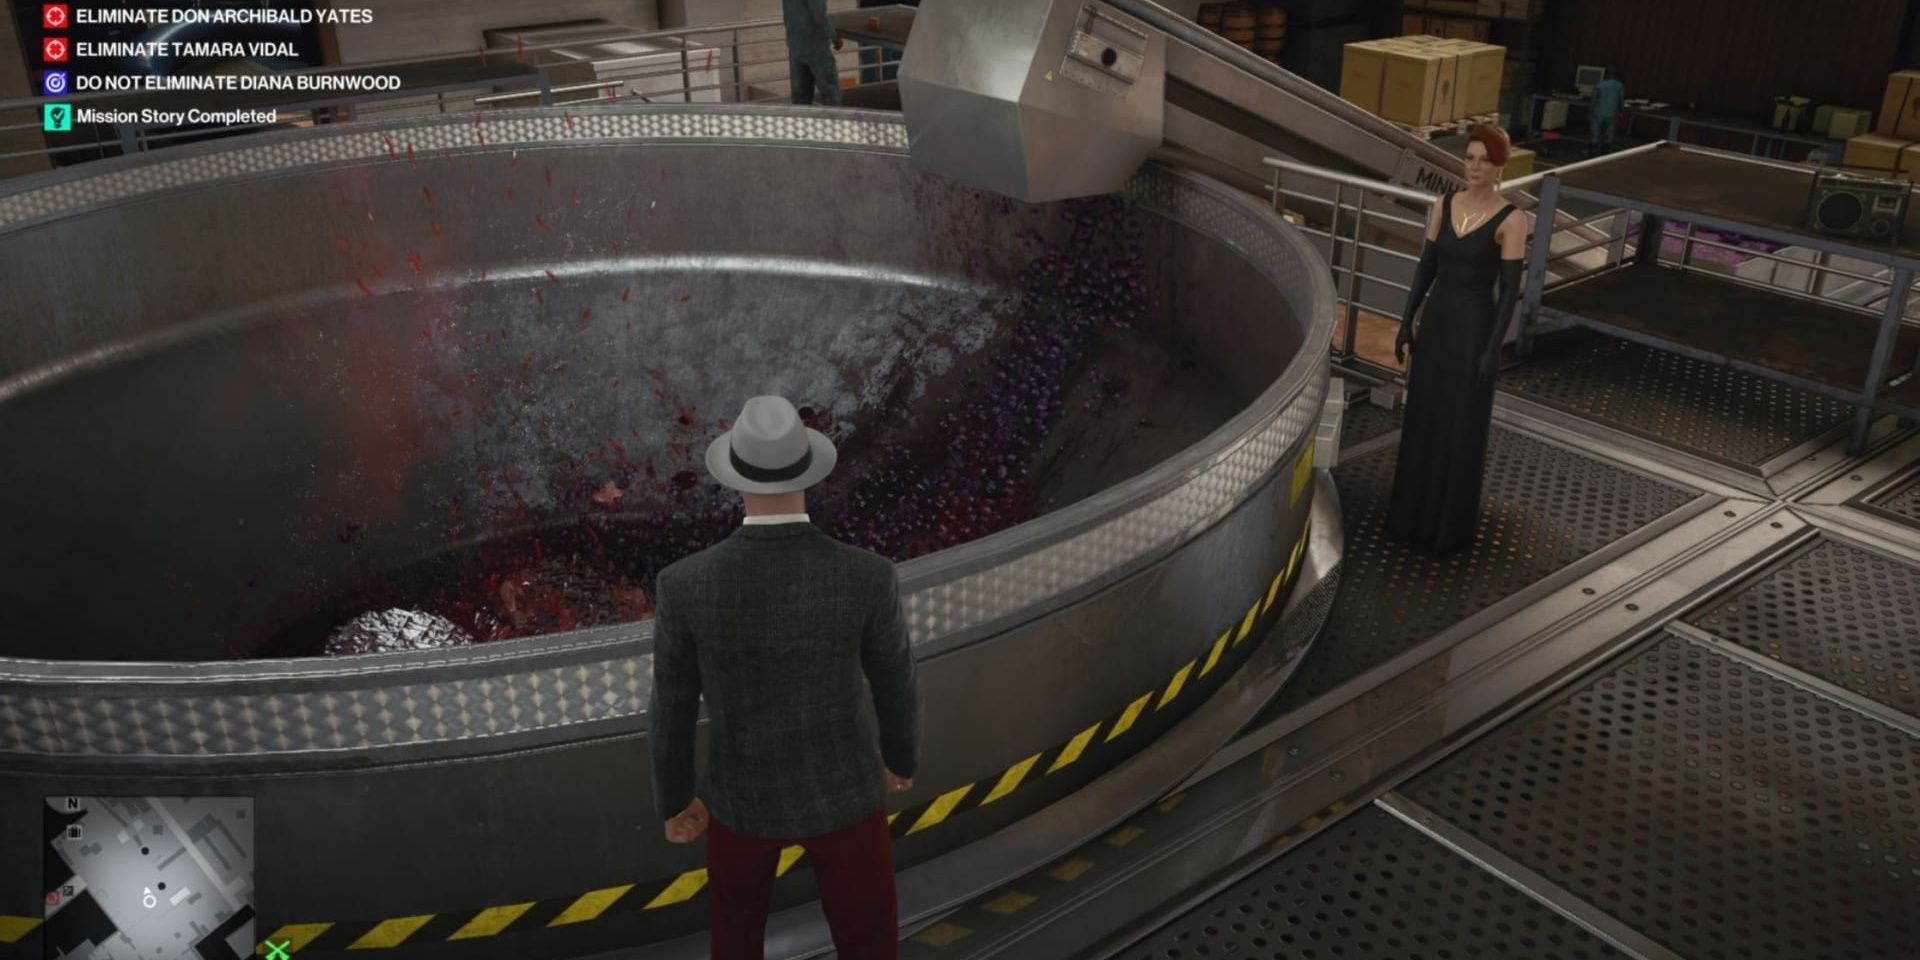 Agent 47 done throwing the target into the grape crusher machine as Diana watches